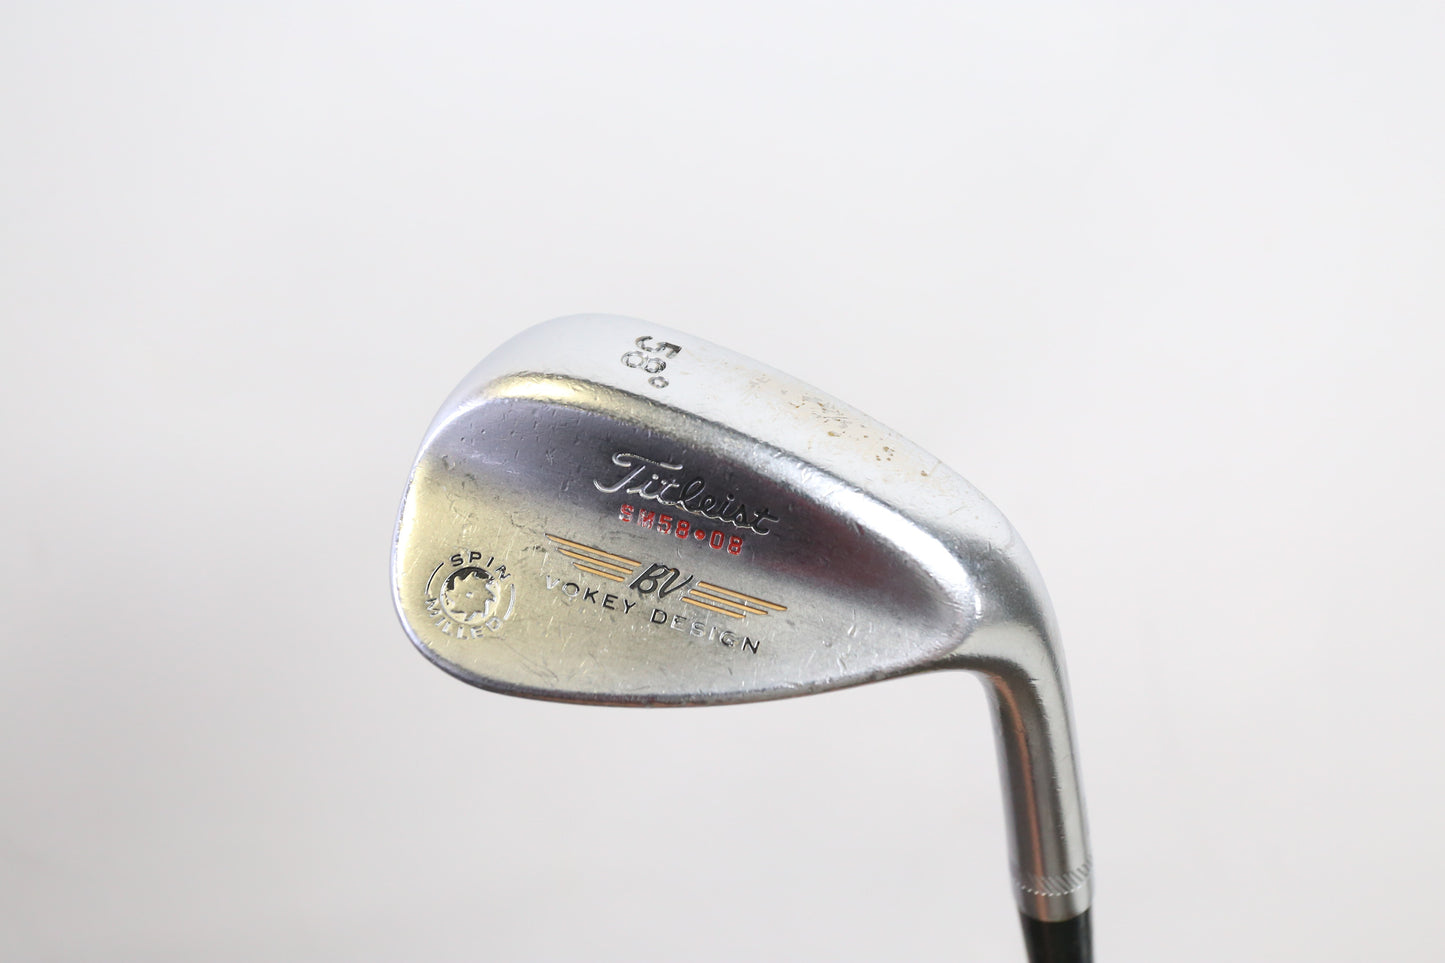 Used Titleist Vokey Spin Milled Lob Wedge - Right-Handed - 58 Degrees - Stiff Flex